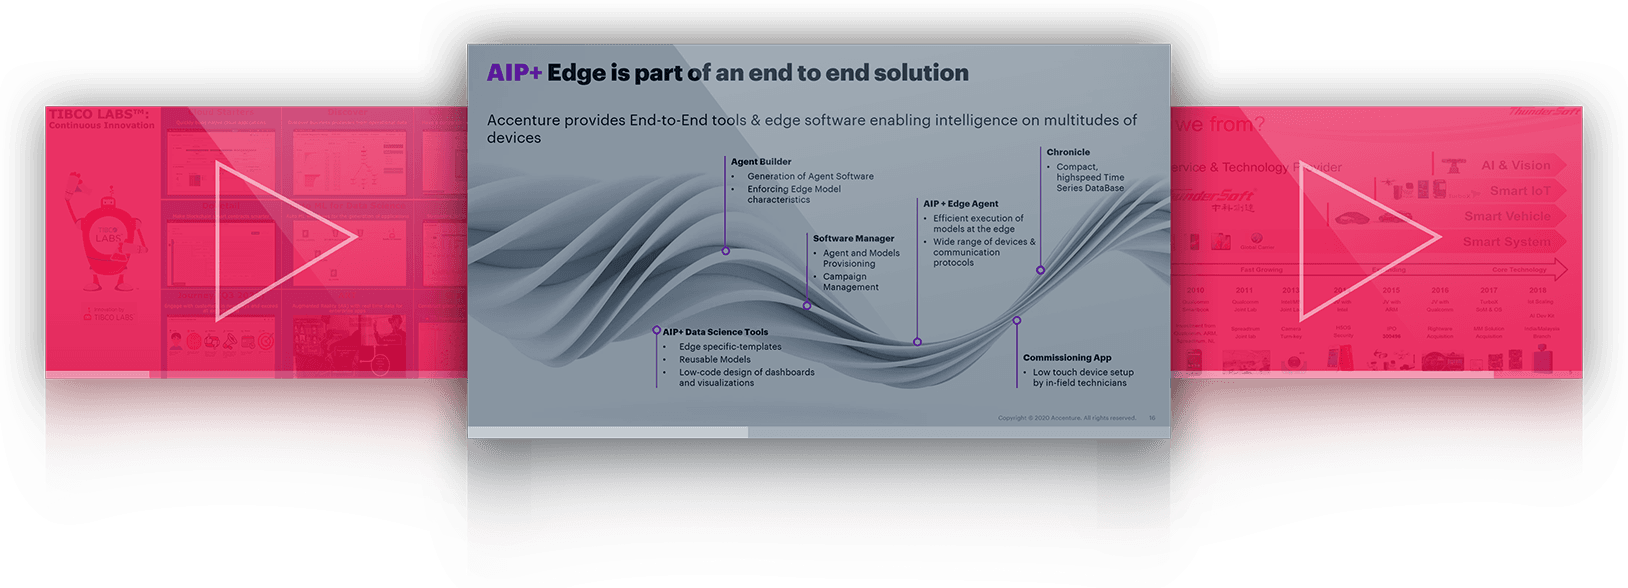 Adopter series, End to end edge software solution | EdgeX Foundry